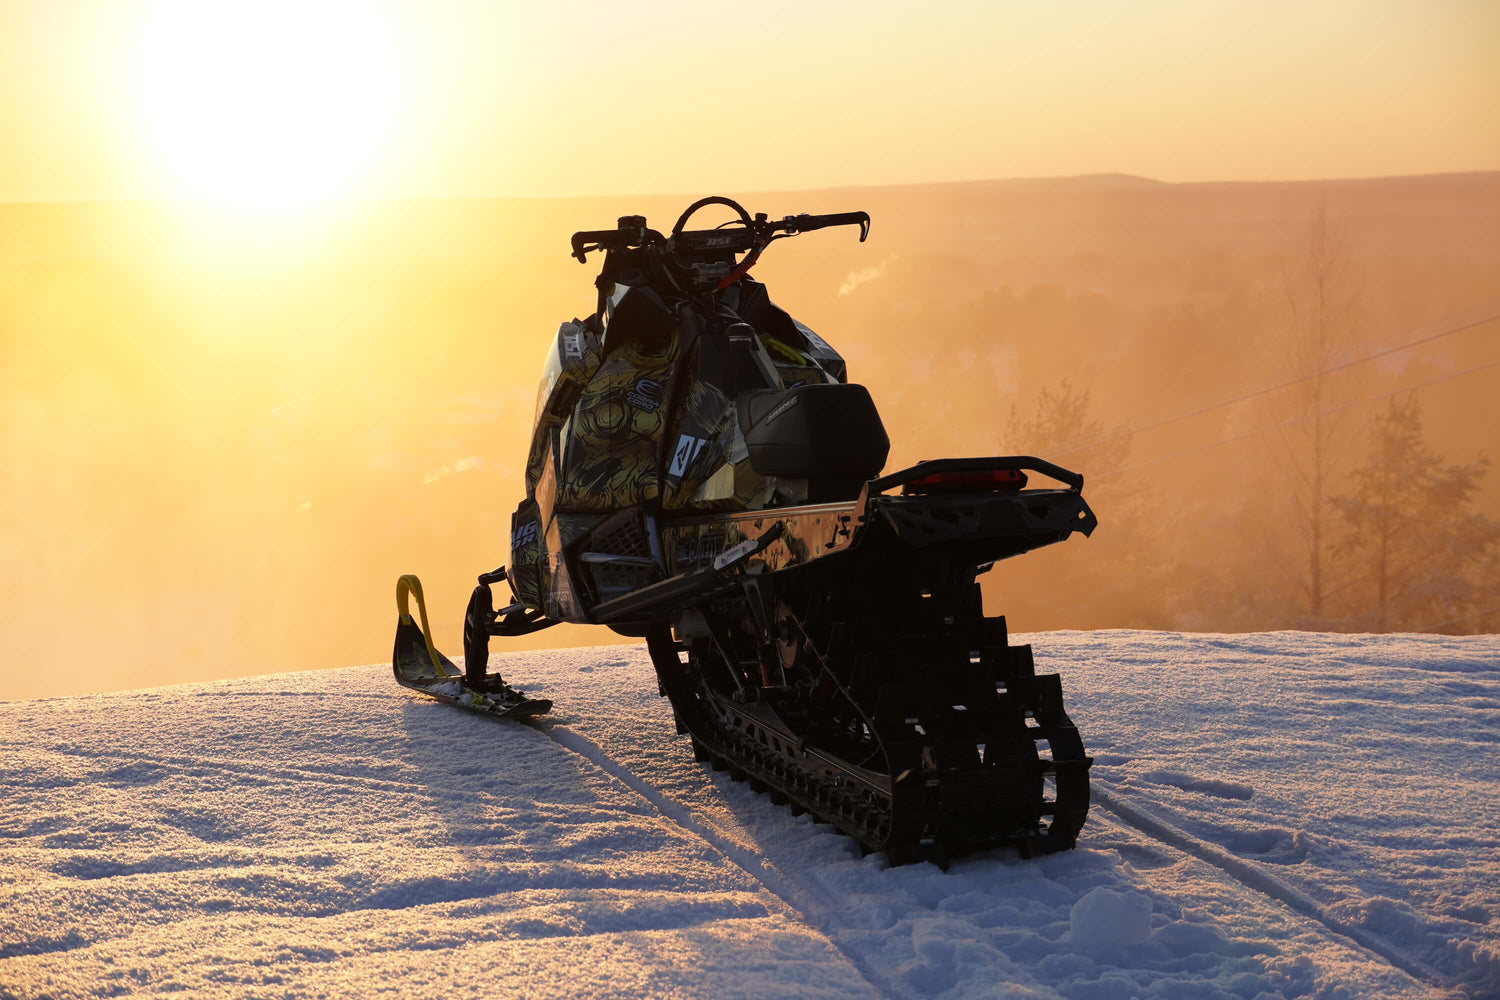 Carbonsled Manufacturers of the lightest, most durable and best handling snowmobile parts in the world.